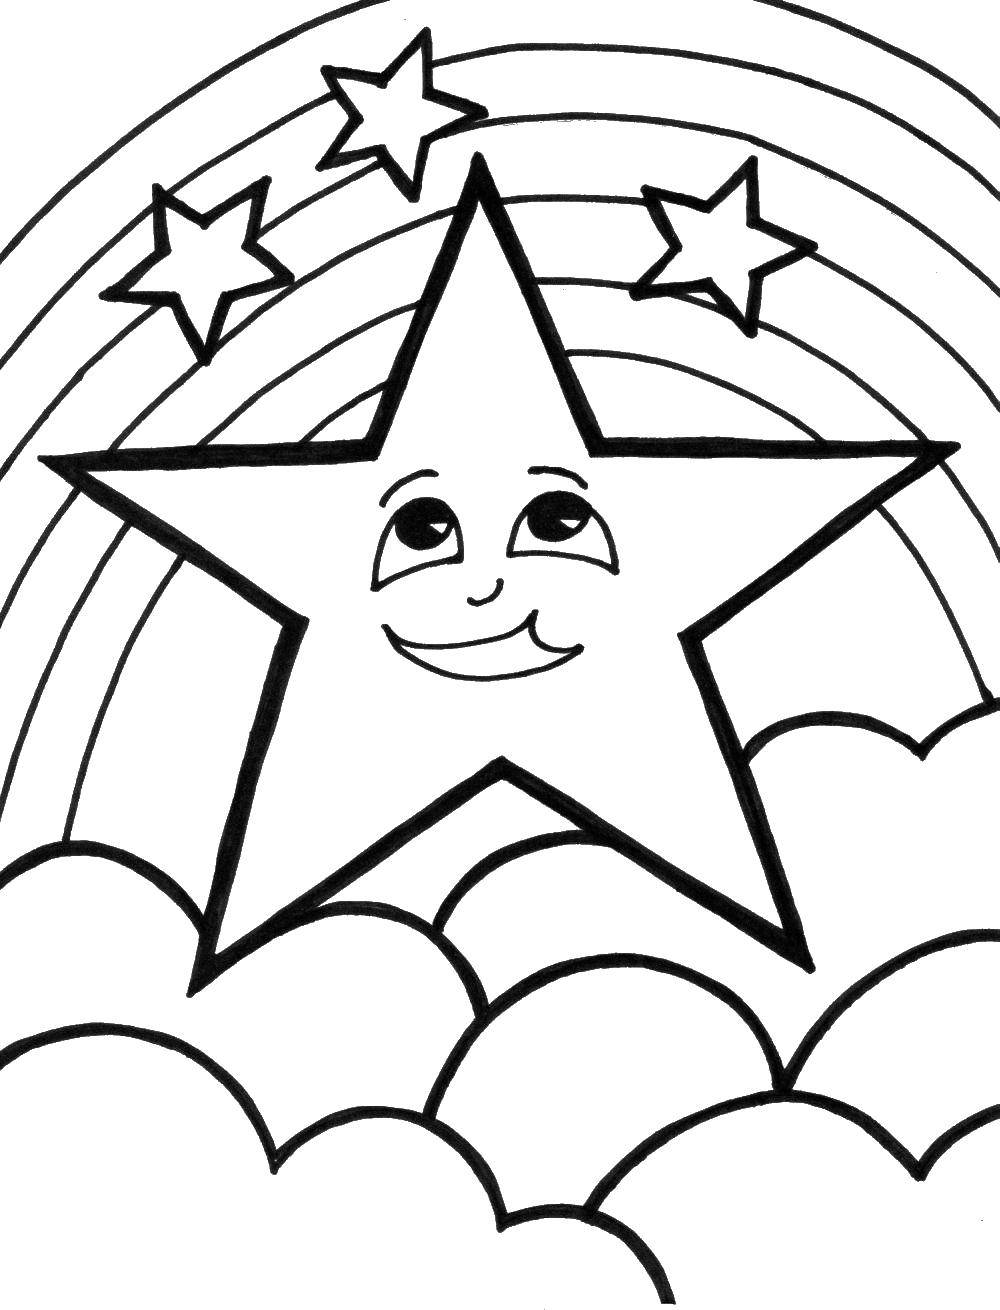 Coloring Fun asterisk. Category sprockets. Tags:  Stars, night.